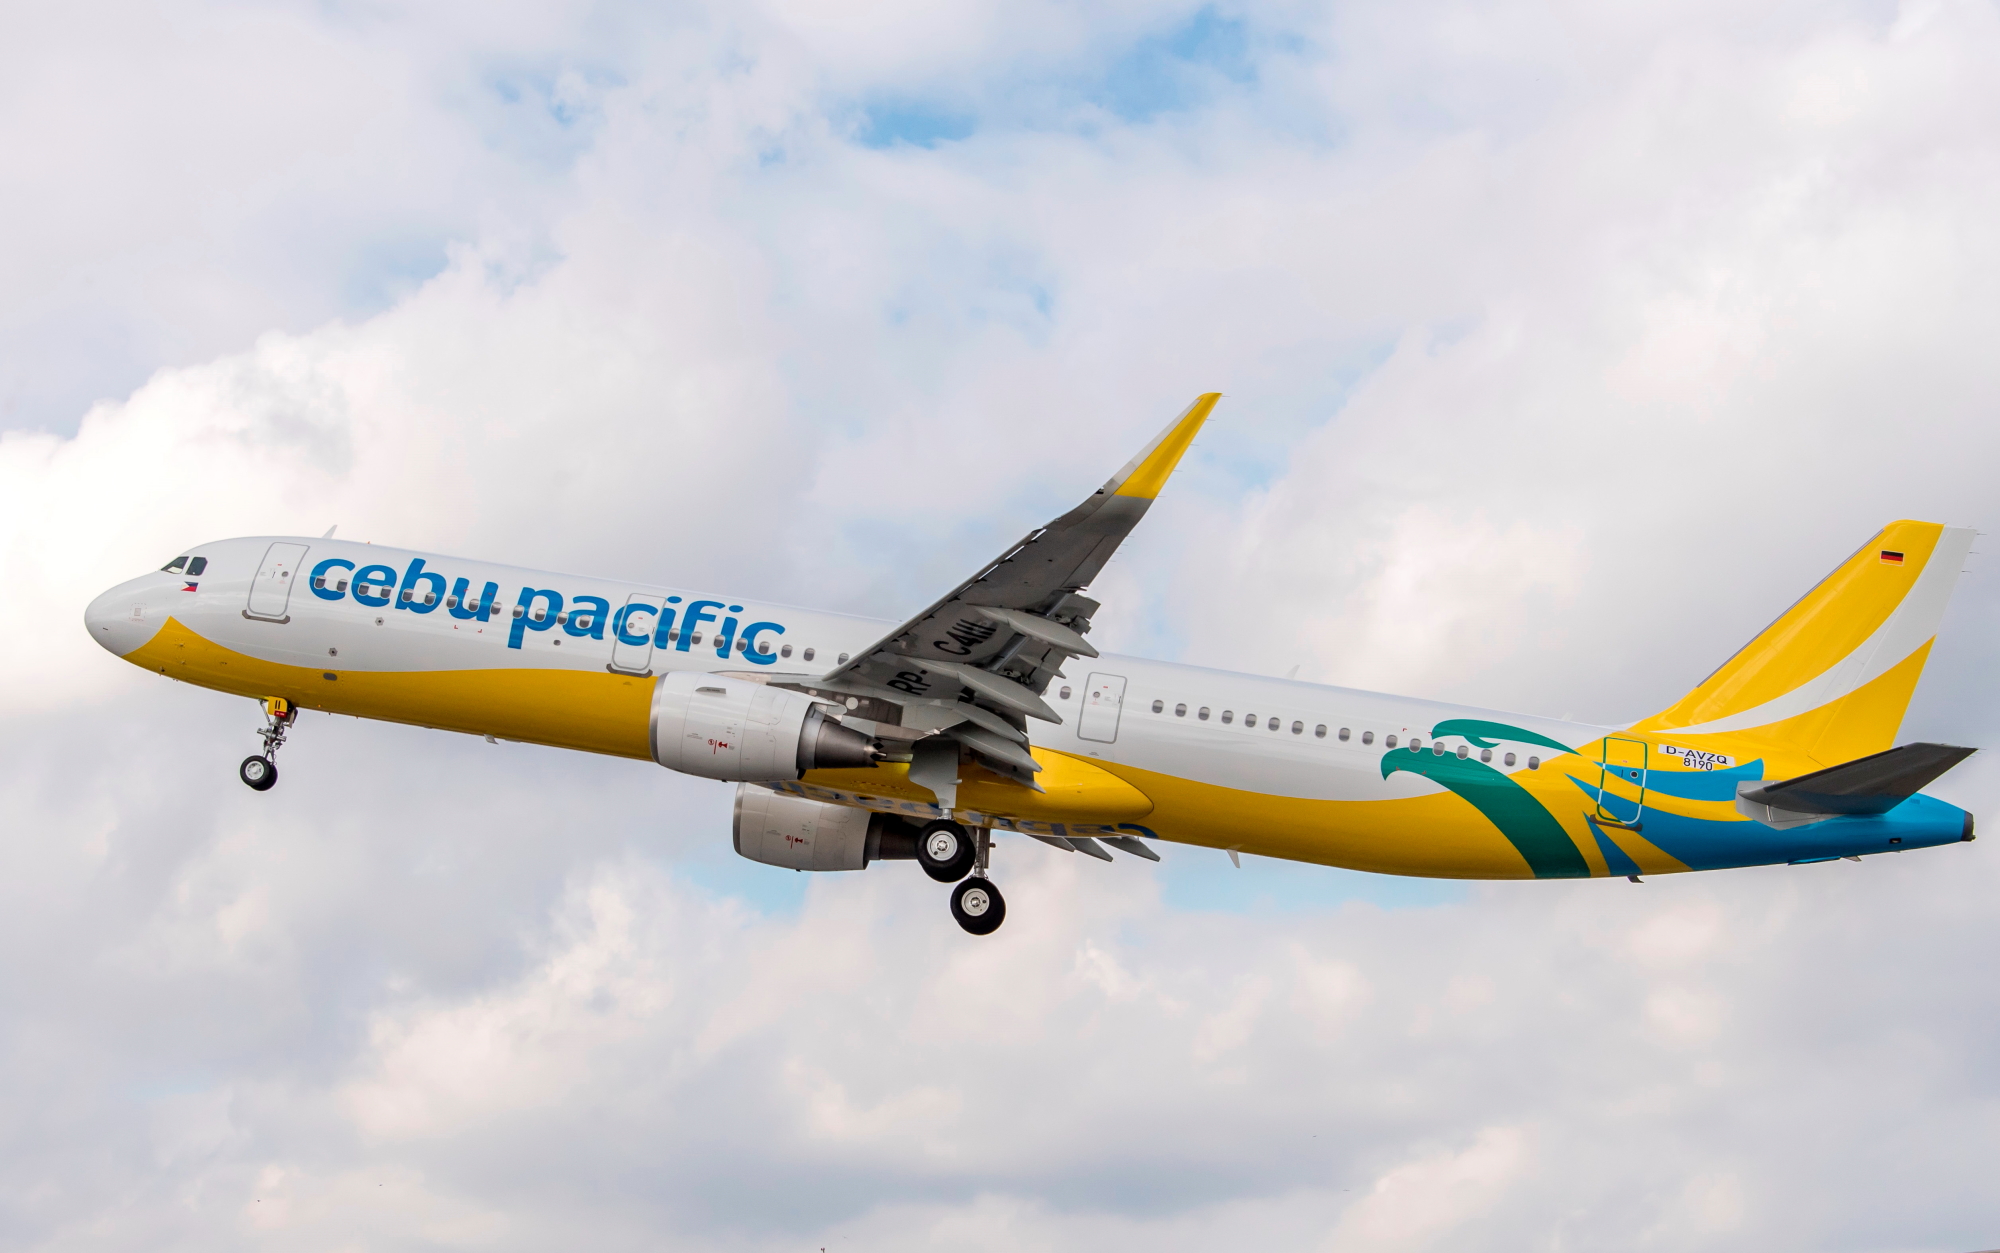 Cebu Pacific Airbus A321ceo. Click to enlarge.